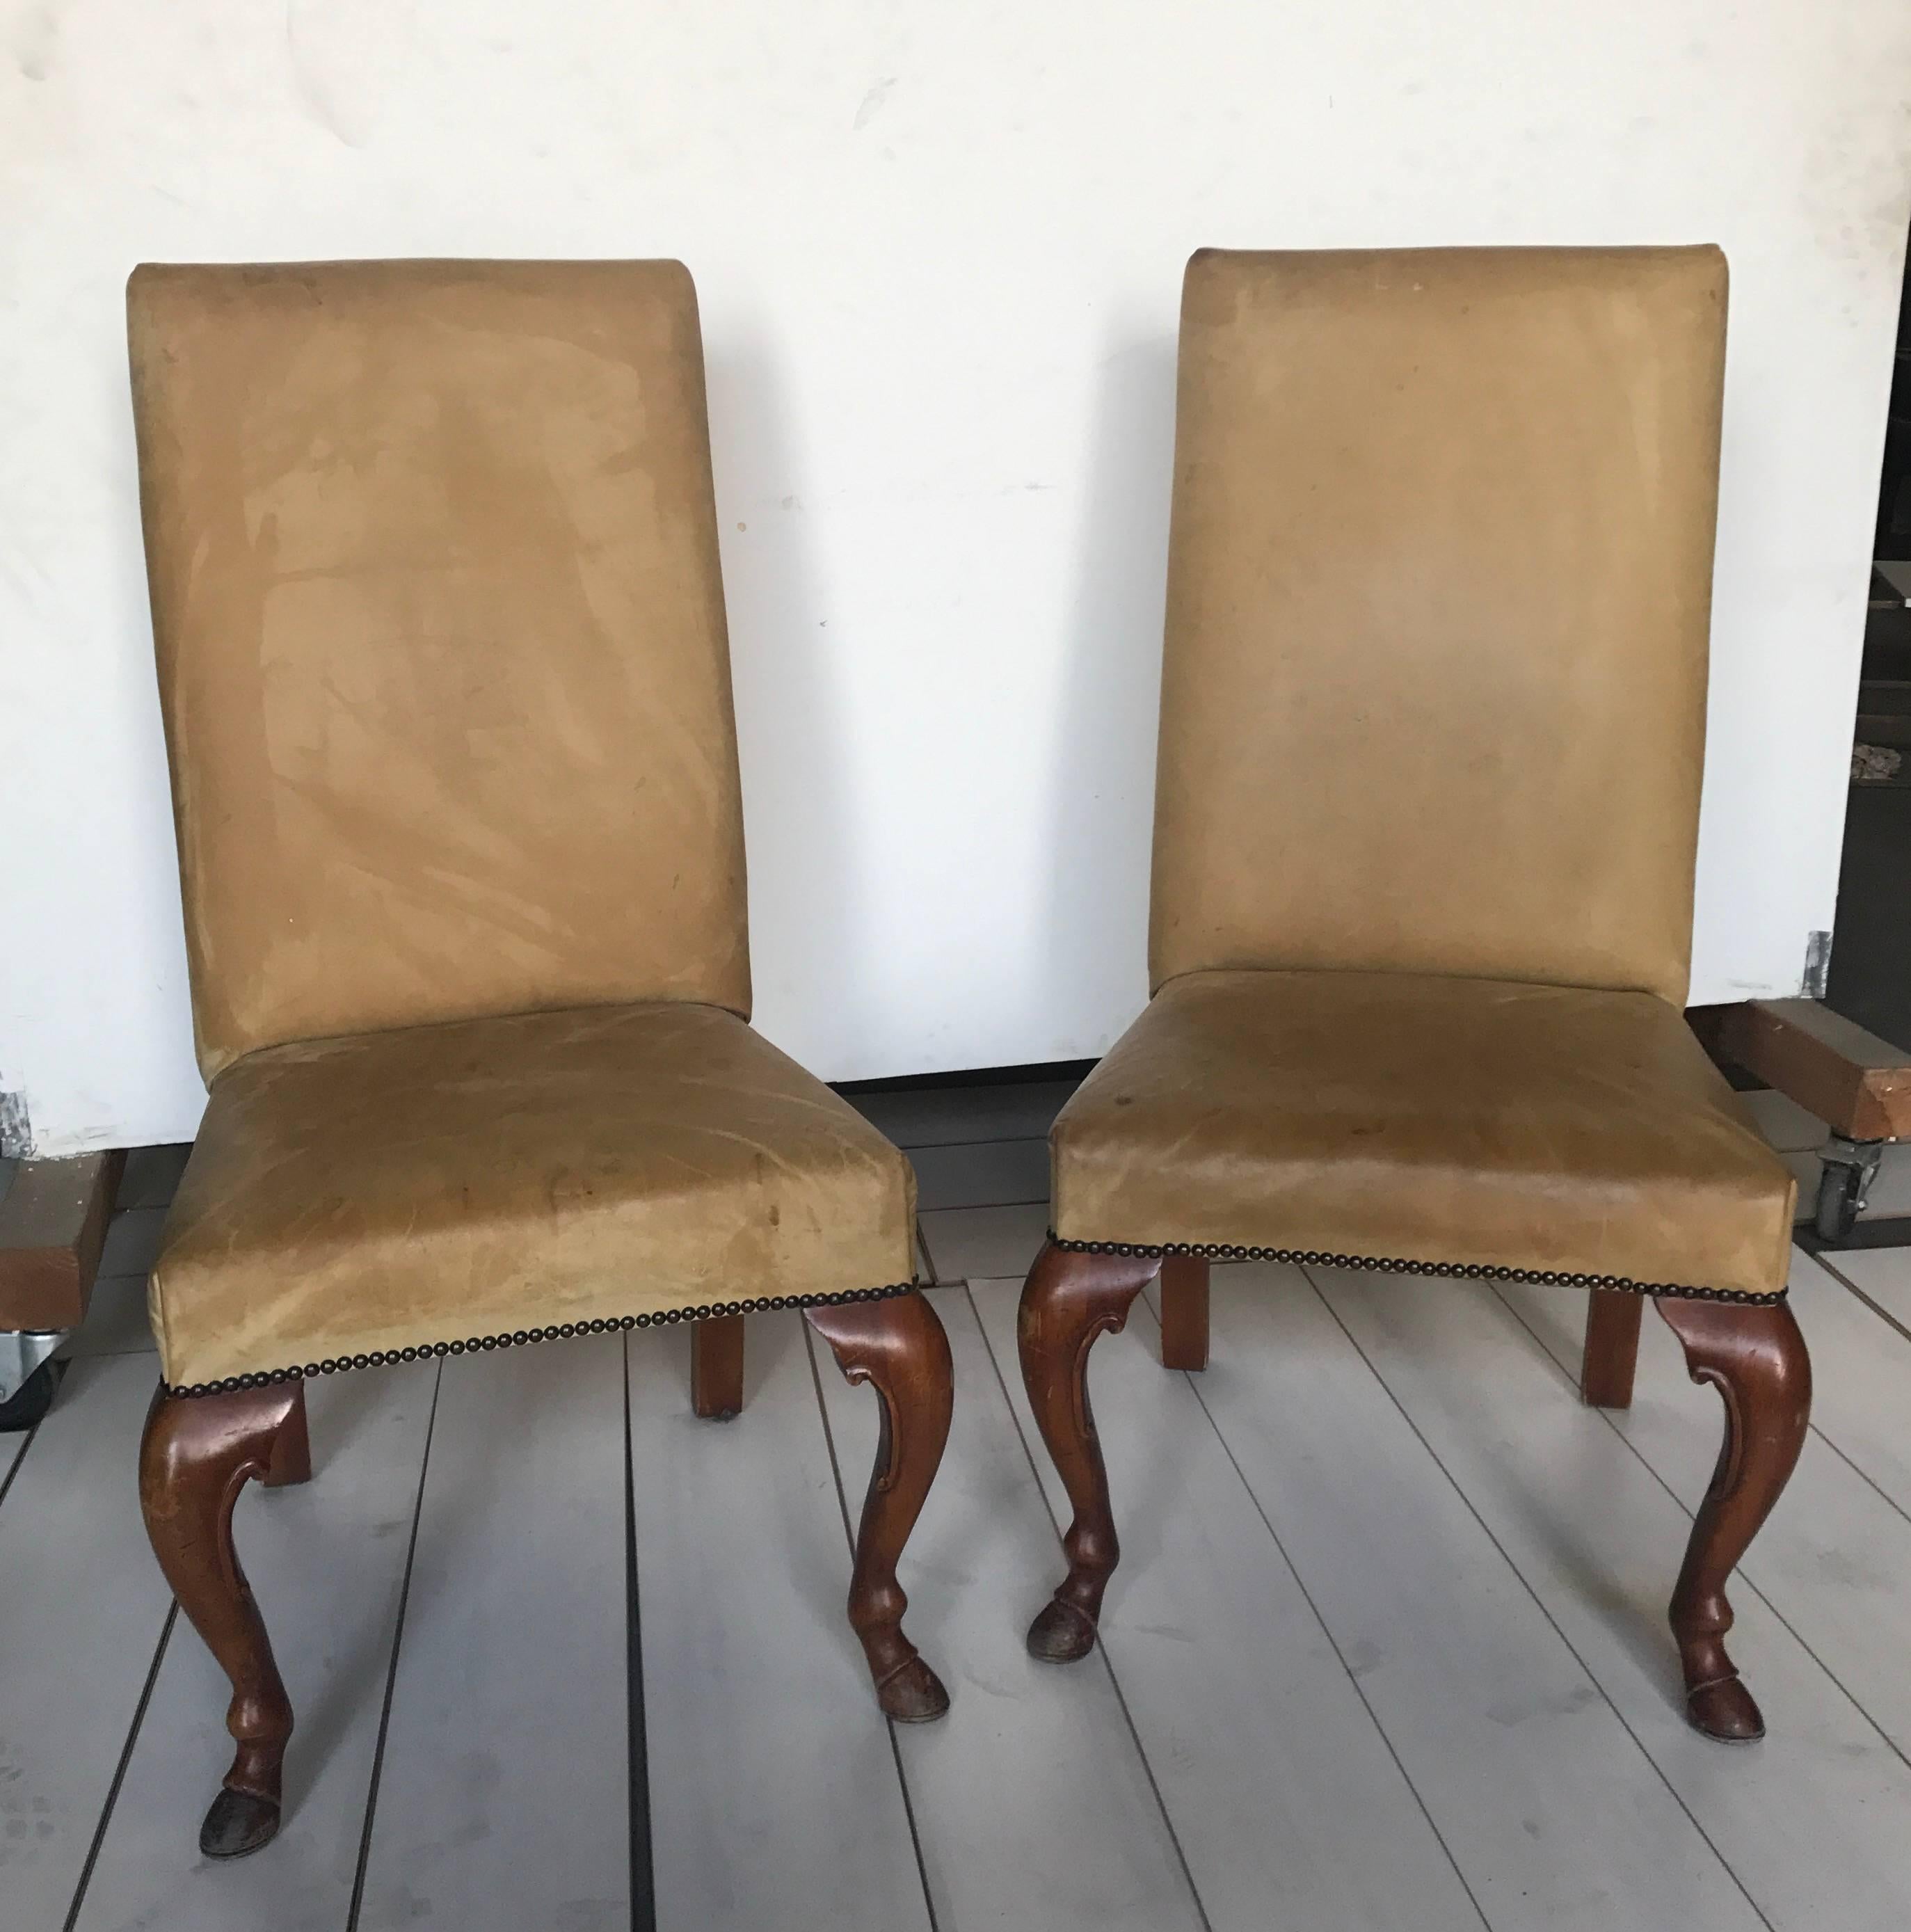 Pair of Ralph Lauren chairs in leather with cabriolet walnut legs. Labelled.